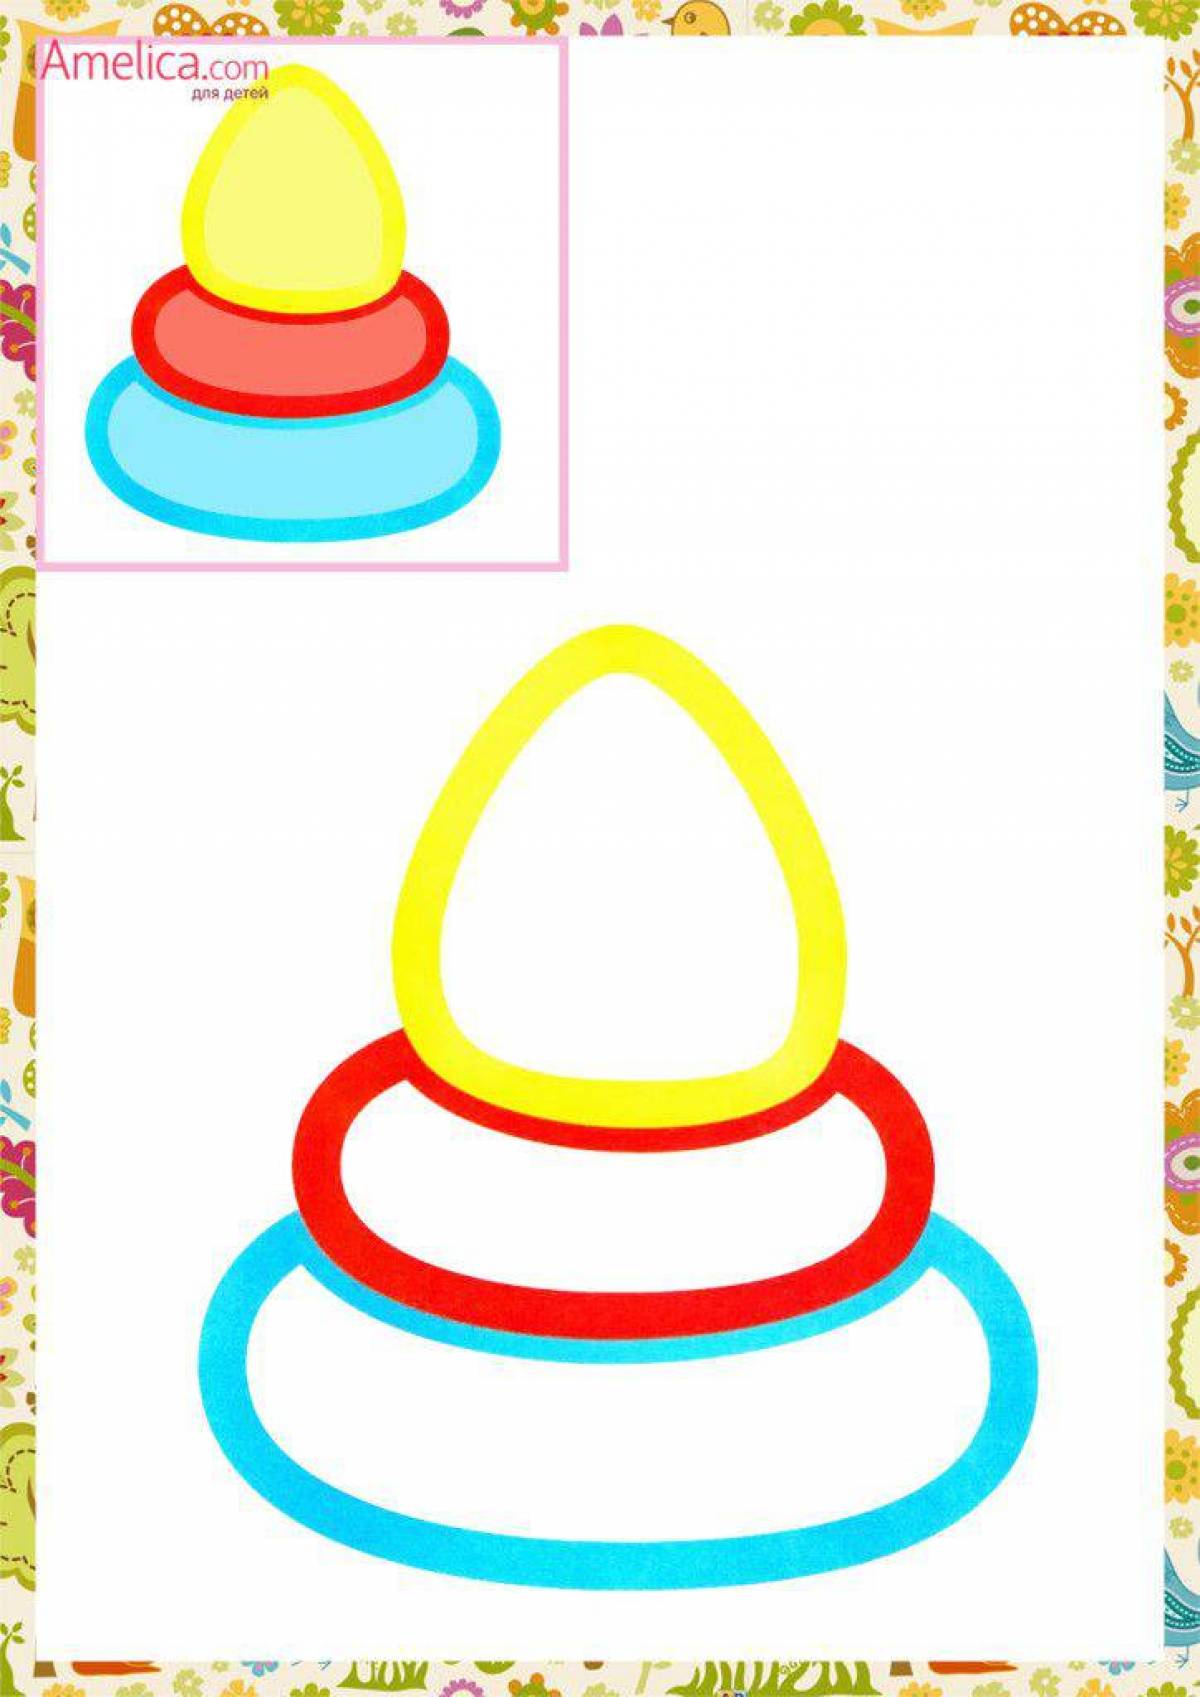 Colored pyramid for kids